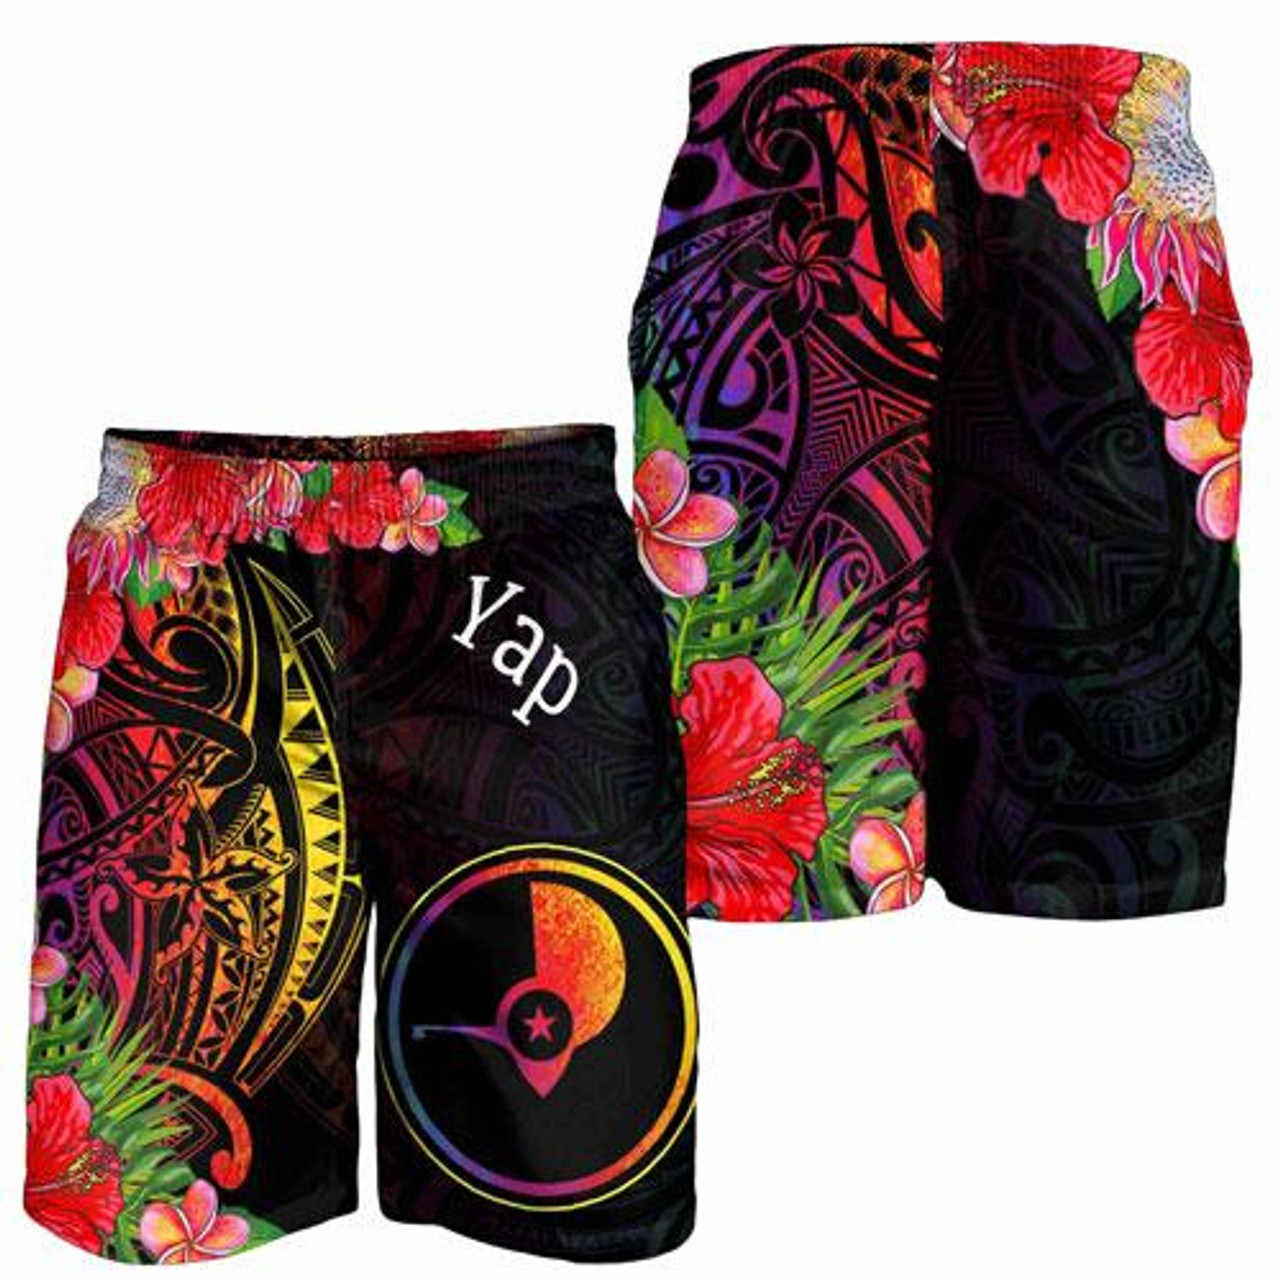 Yap State Men Shorts - Tropical Hippie Style 1